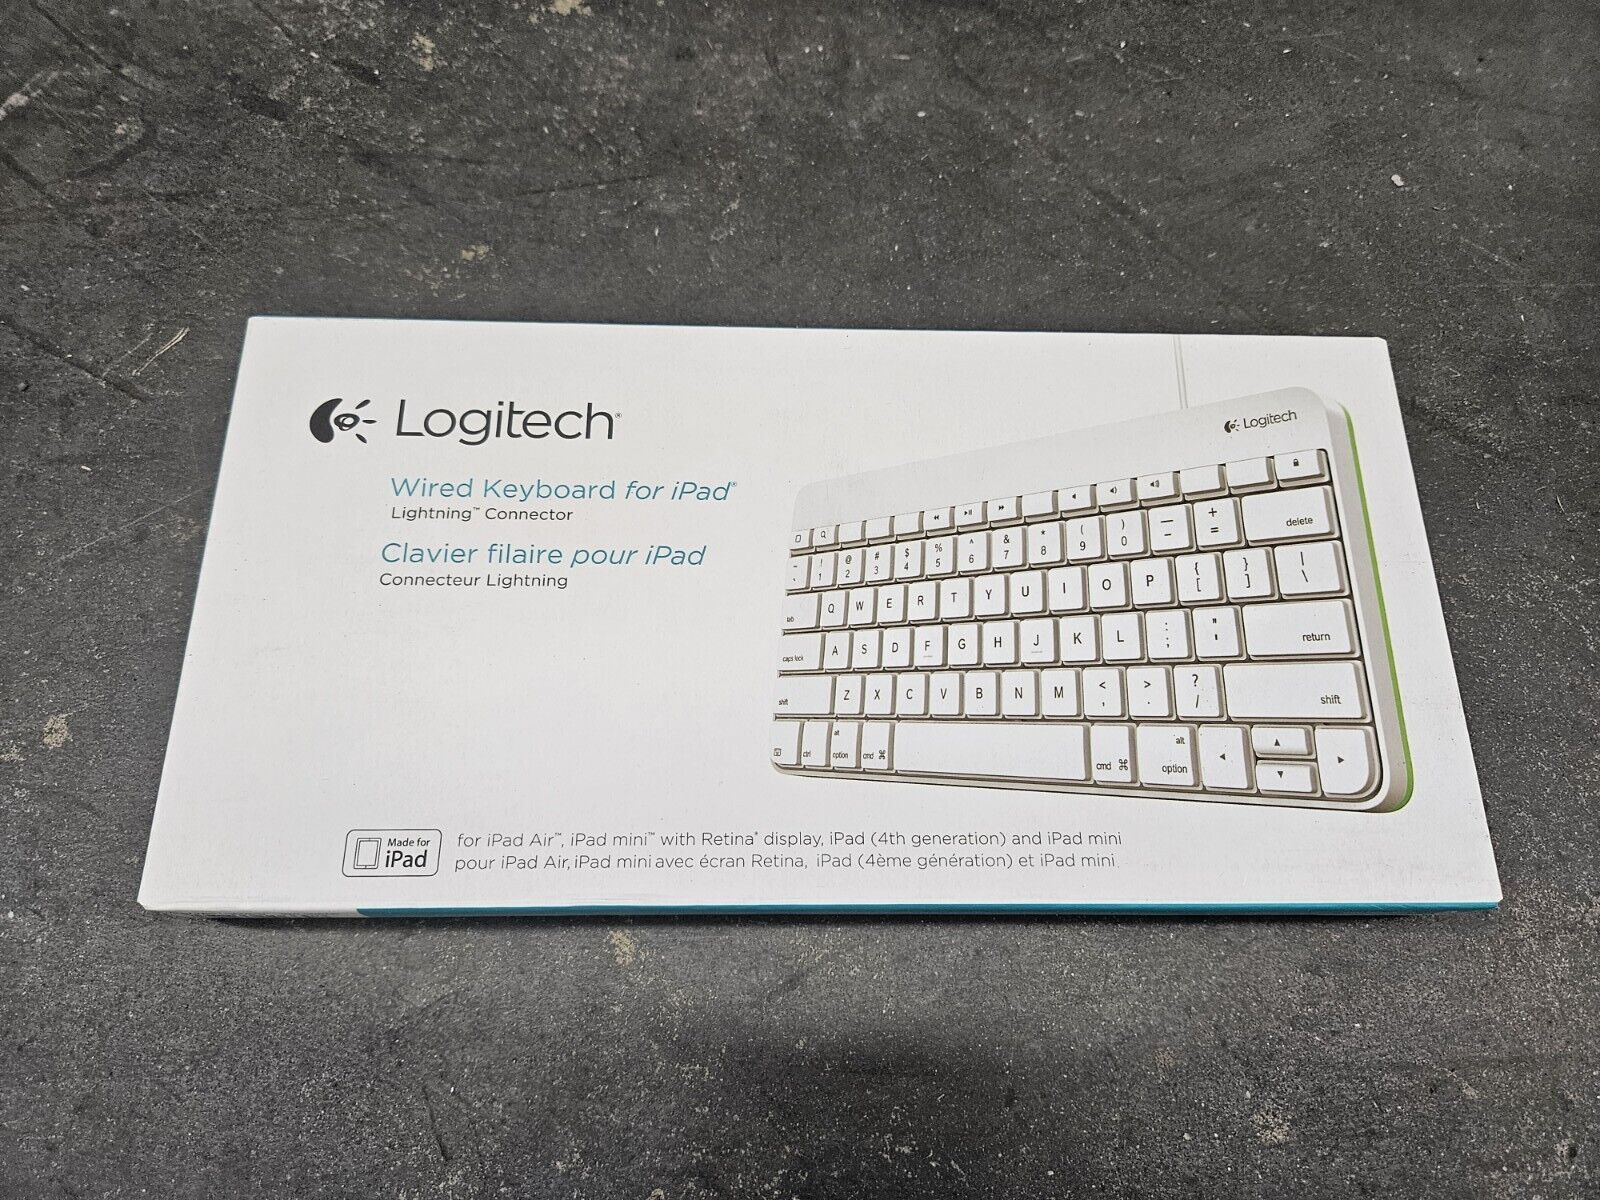 Logitech 920-006341 Wired Keyboard With Lightning Connector for iPad NEW